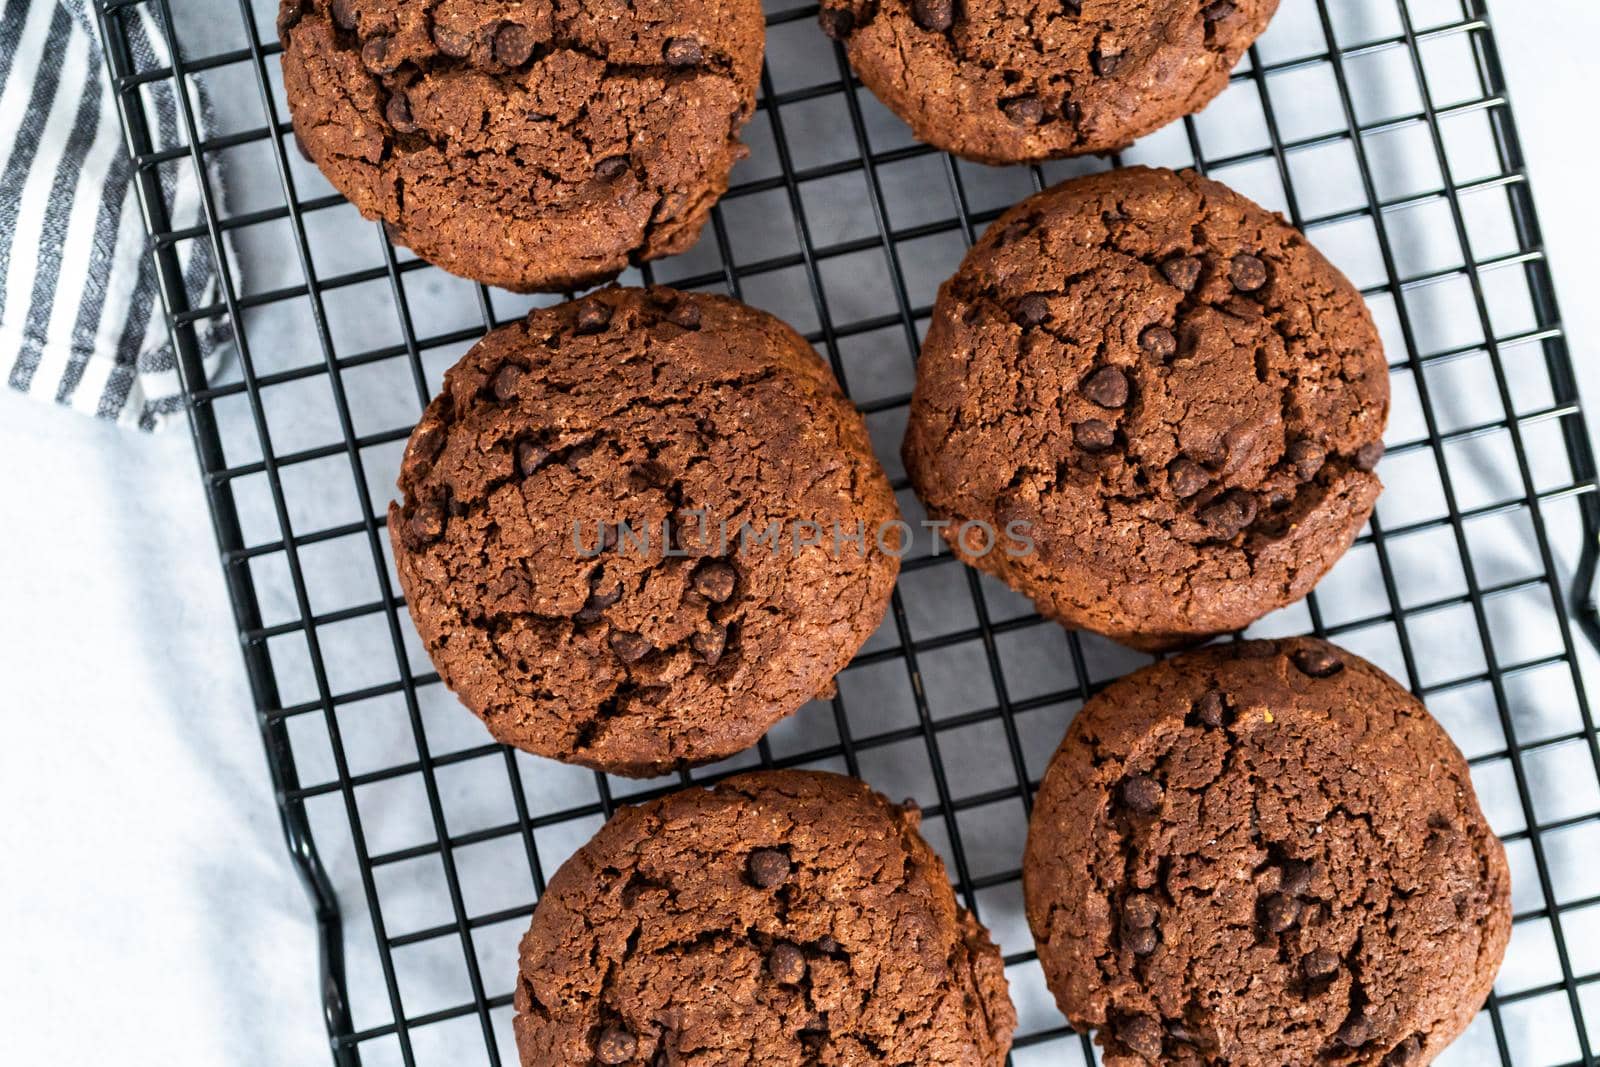 Freshly baked double chocolate chip cookies on a cooling rack.